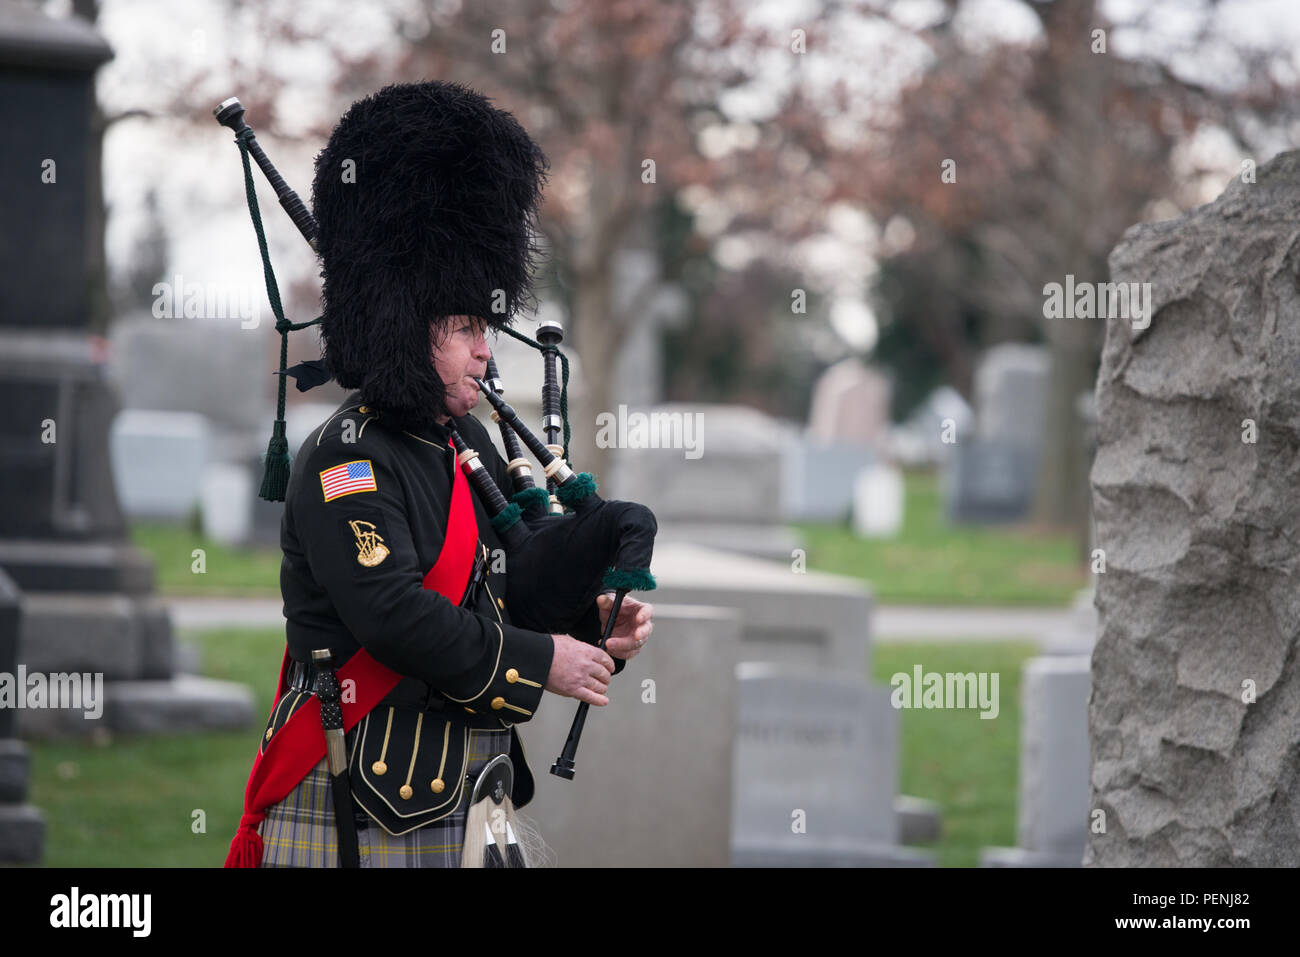 A bagpiper plays music during the Pan Am Flight 103 memorial ceremony in Arlington National Cemetery, Dec. 21, 2015, in Arlington, Va. A terrorist’s bomb destroyed the aircraft 27 years ago, in what became known as the “Lockerbie bombing,” killing 243 passengers, 16 crew members and 11 people on the ground. (U.S. Army photo by Rachel Larue/Arlington National Cemetery/released) Stock Photo